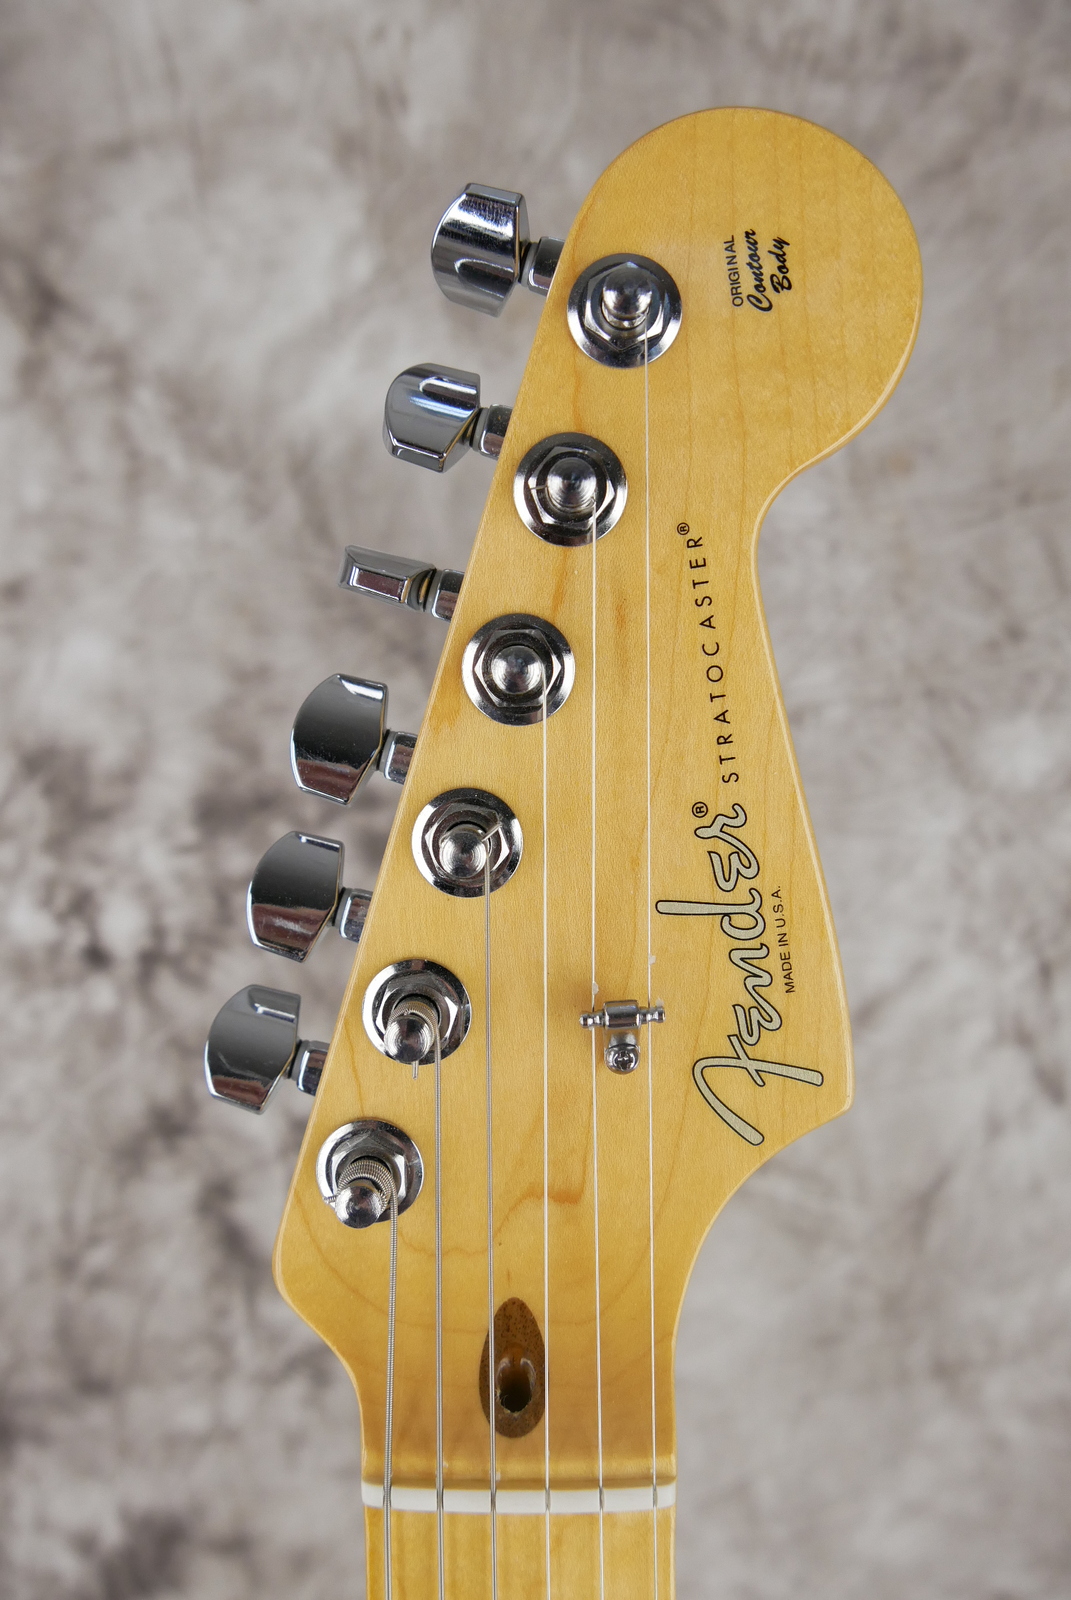 Fender_Stratocaster_USA_built_from_parts_candy_apple_red_2015-009.JPG